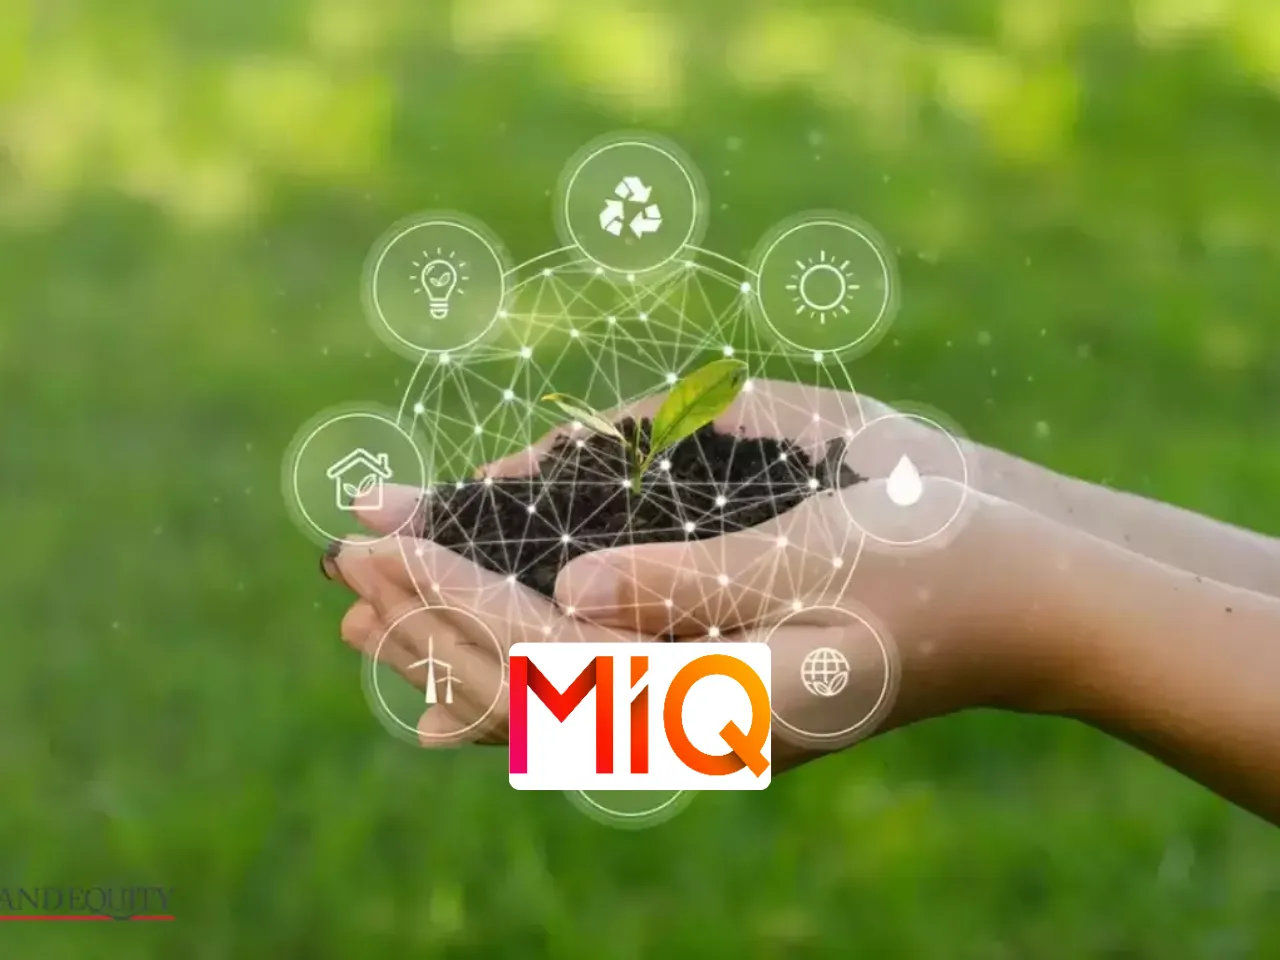 MiQ launches sustainable advertising solution to reduce digital ads' carbon footprints